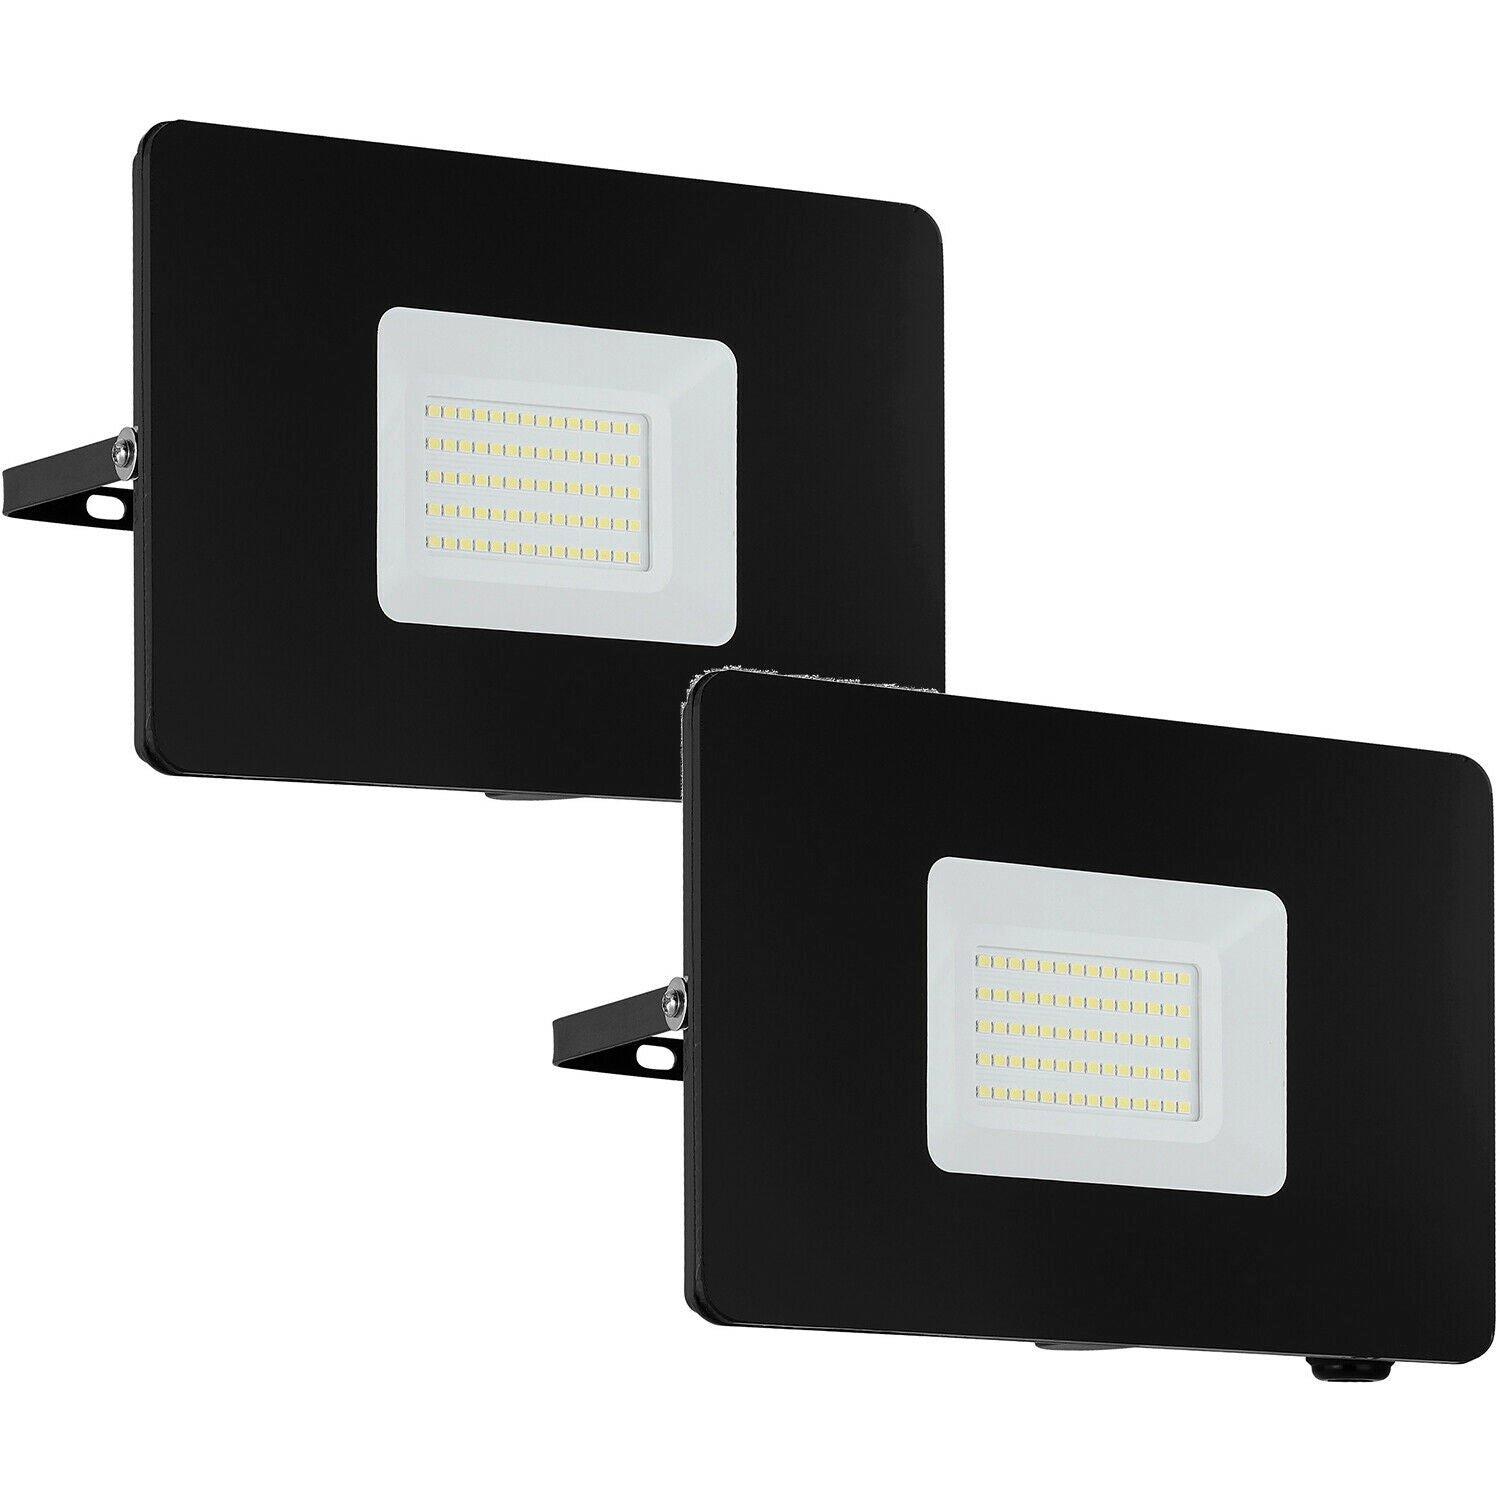 2 PACK IP65 Outdoor Wall Flood Light Black Adjustable 50W LED Porch Lamp